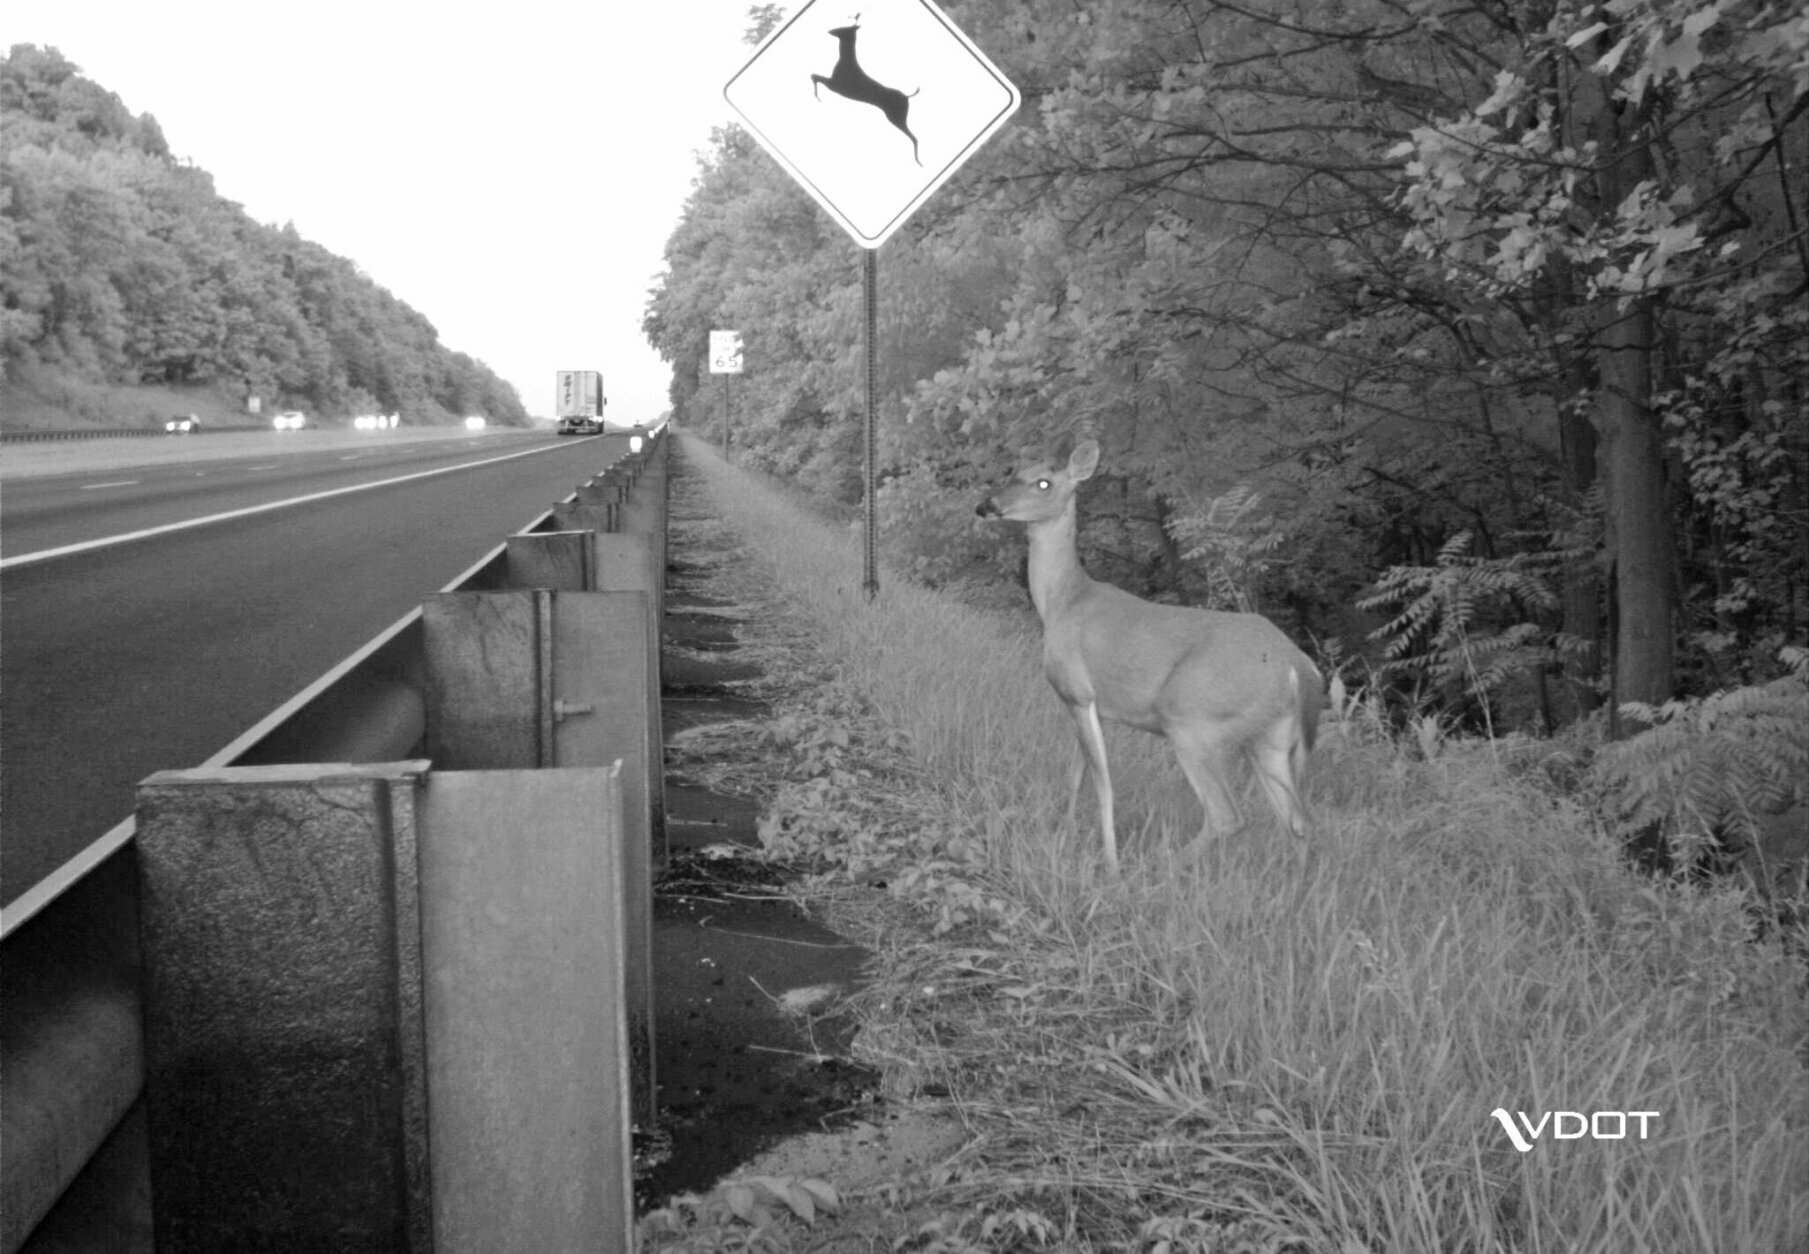 deer crossing sign black and white